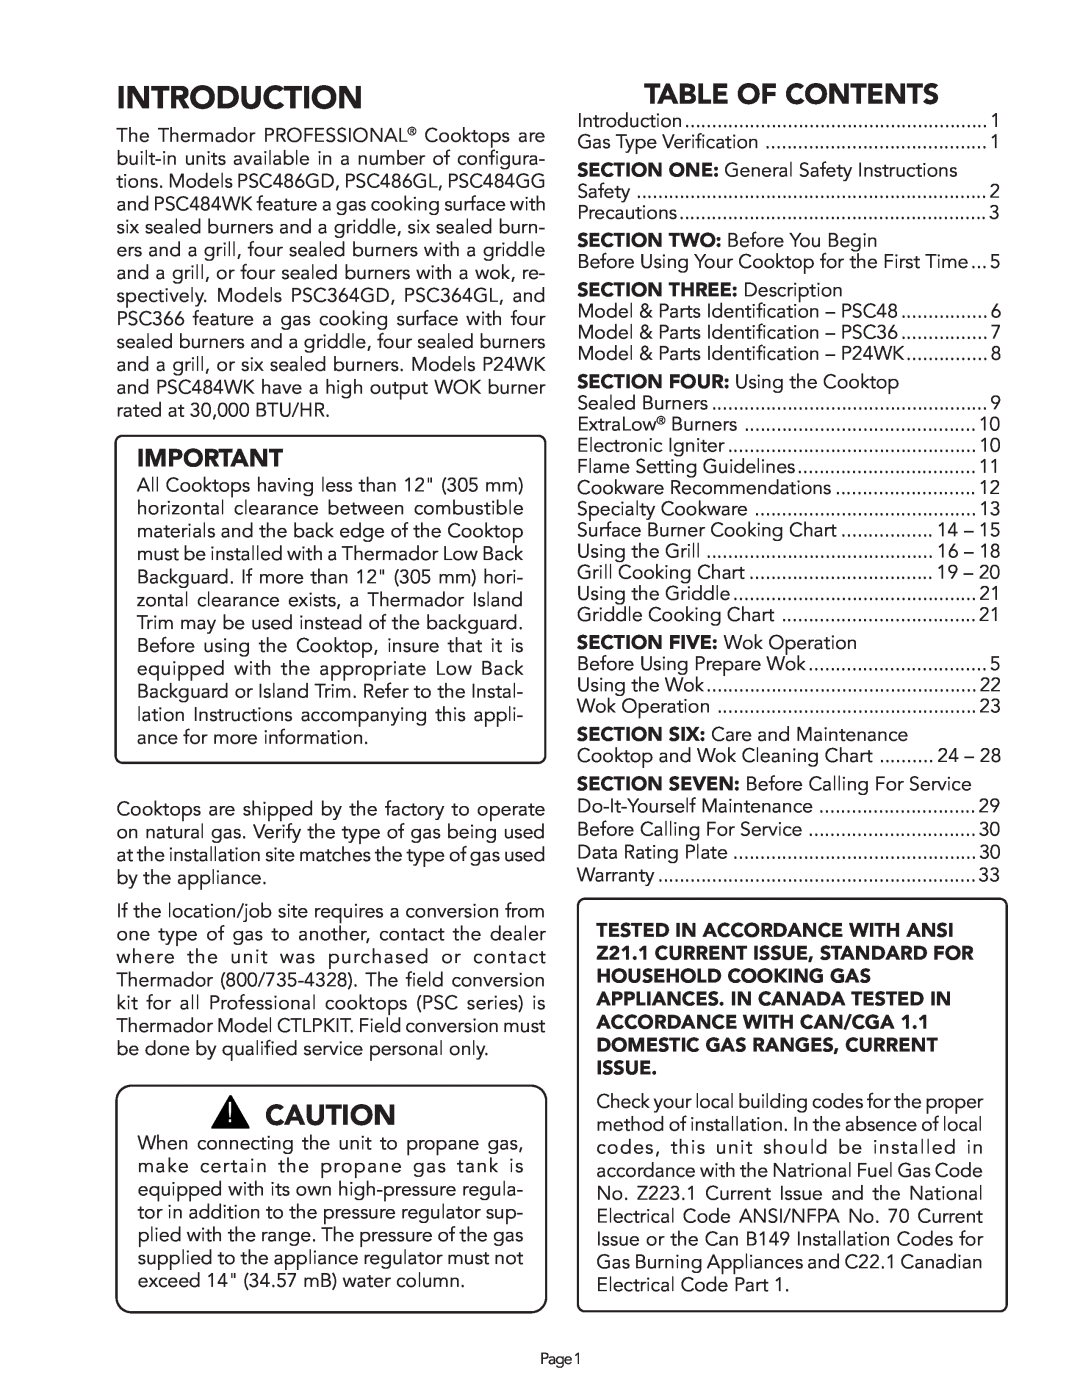 Thermador PSC486GD, PSC366, PSC364GD Introduction, Table Of Contents, SECTION THREE Description, SECTION FIVE Wok Operation 